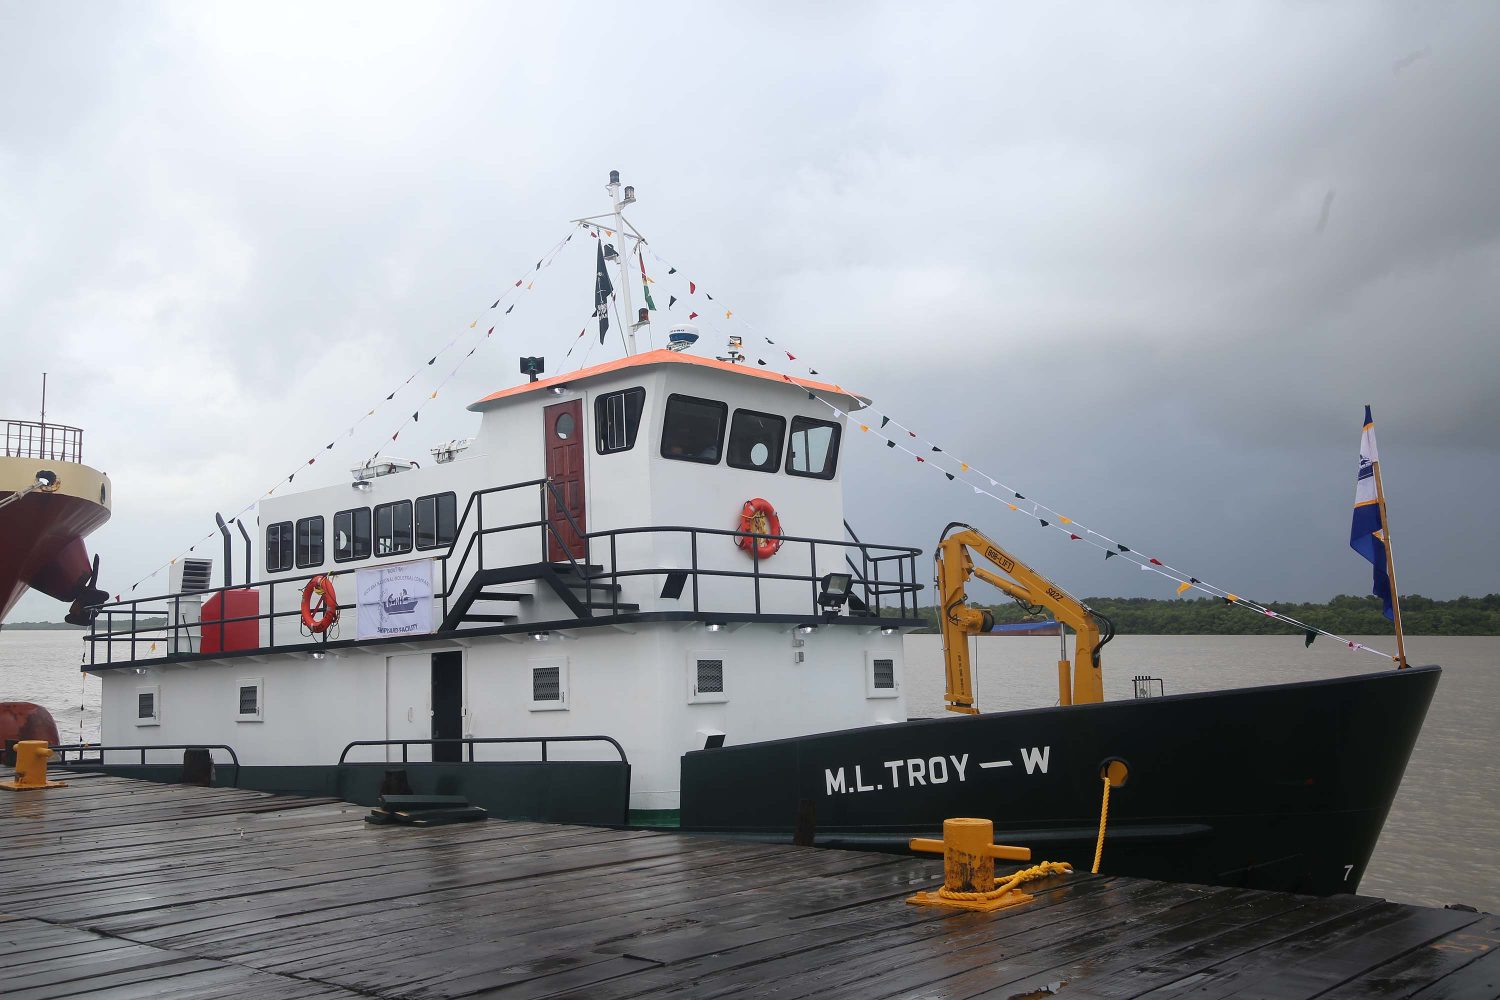 The newly commissioned M.L Troy-W